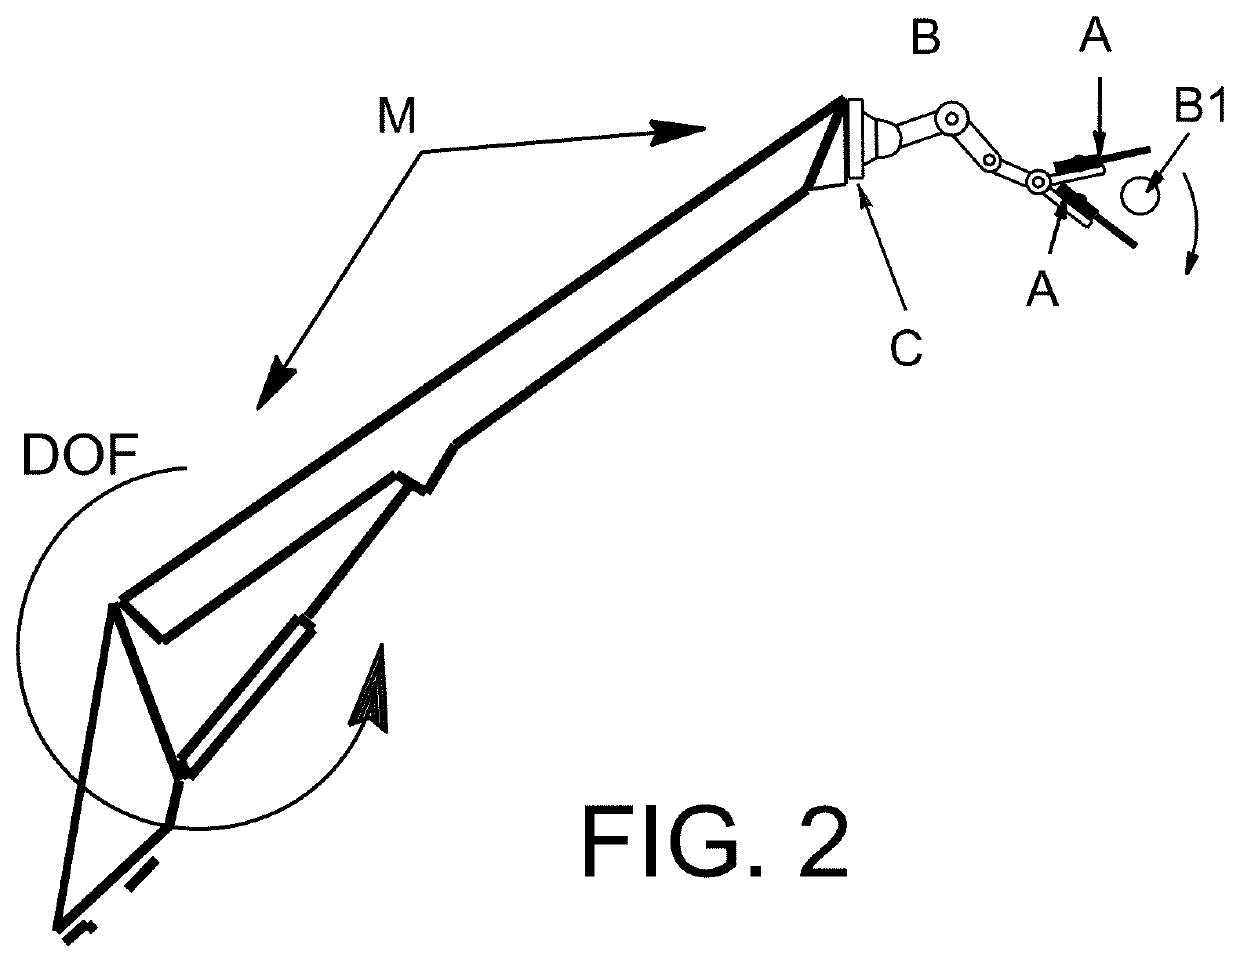 Multiple robotic arm tree and shrub cutting and trimming device